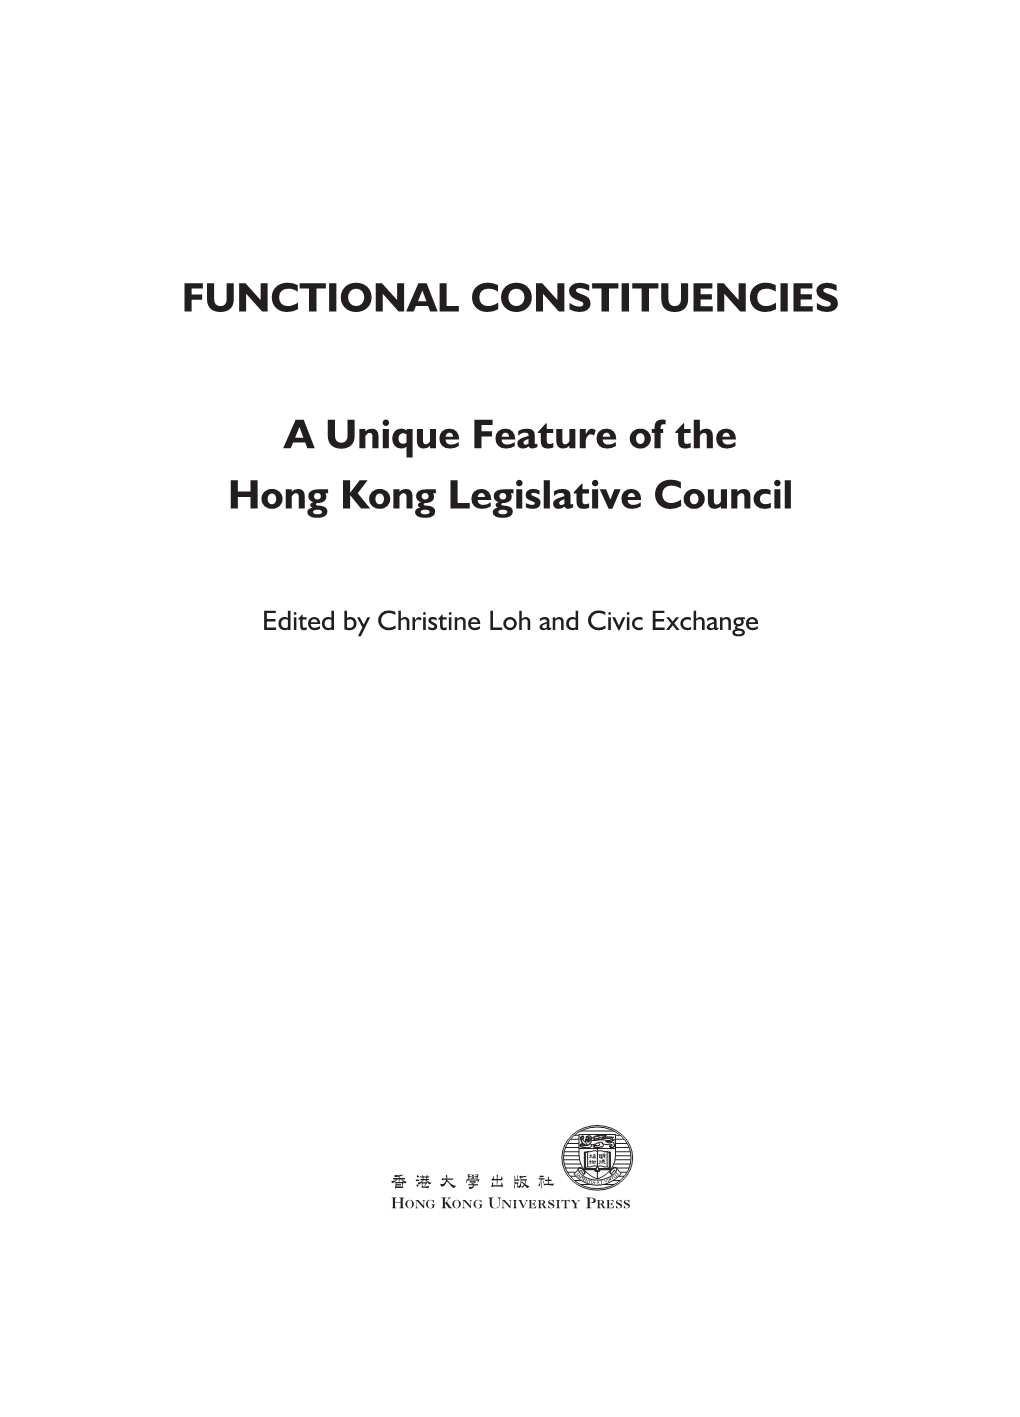 FUNCTIONAL CONSTITUENCIES a Unique Feature of the Hong Kong